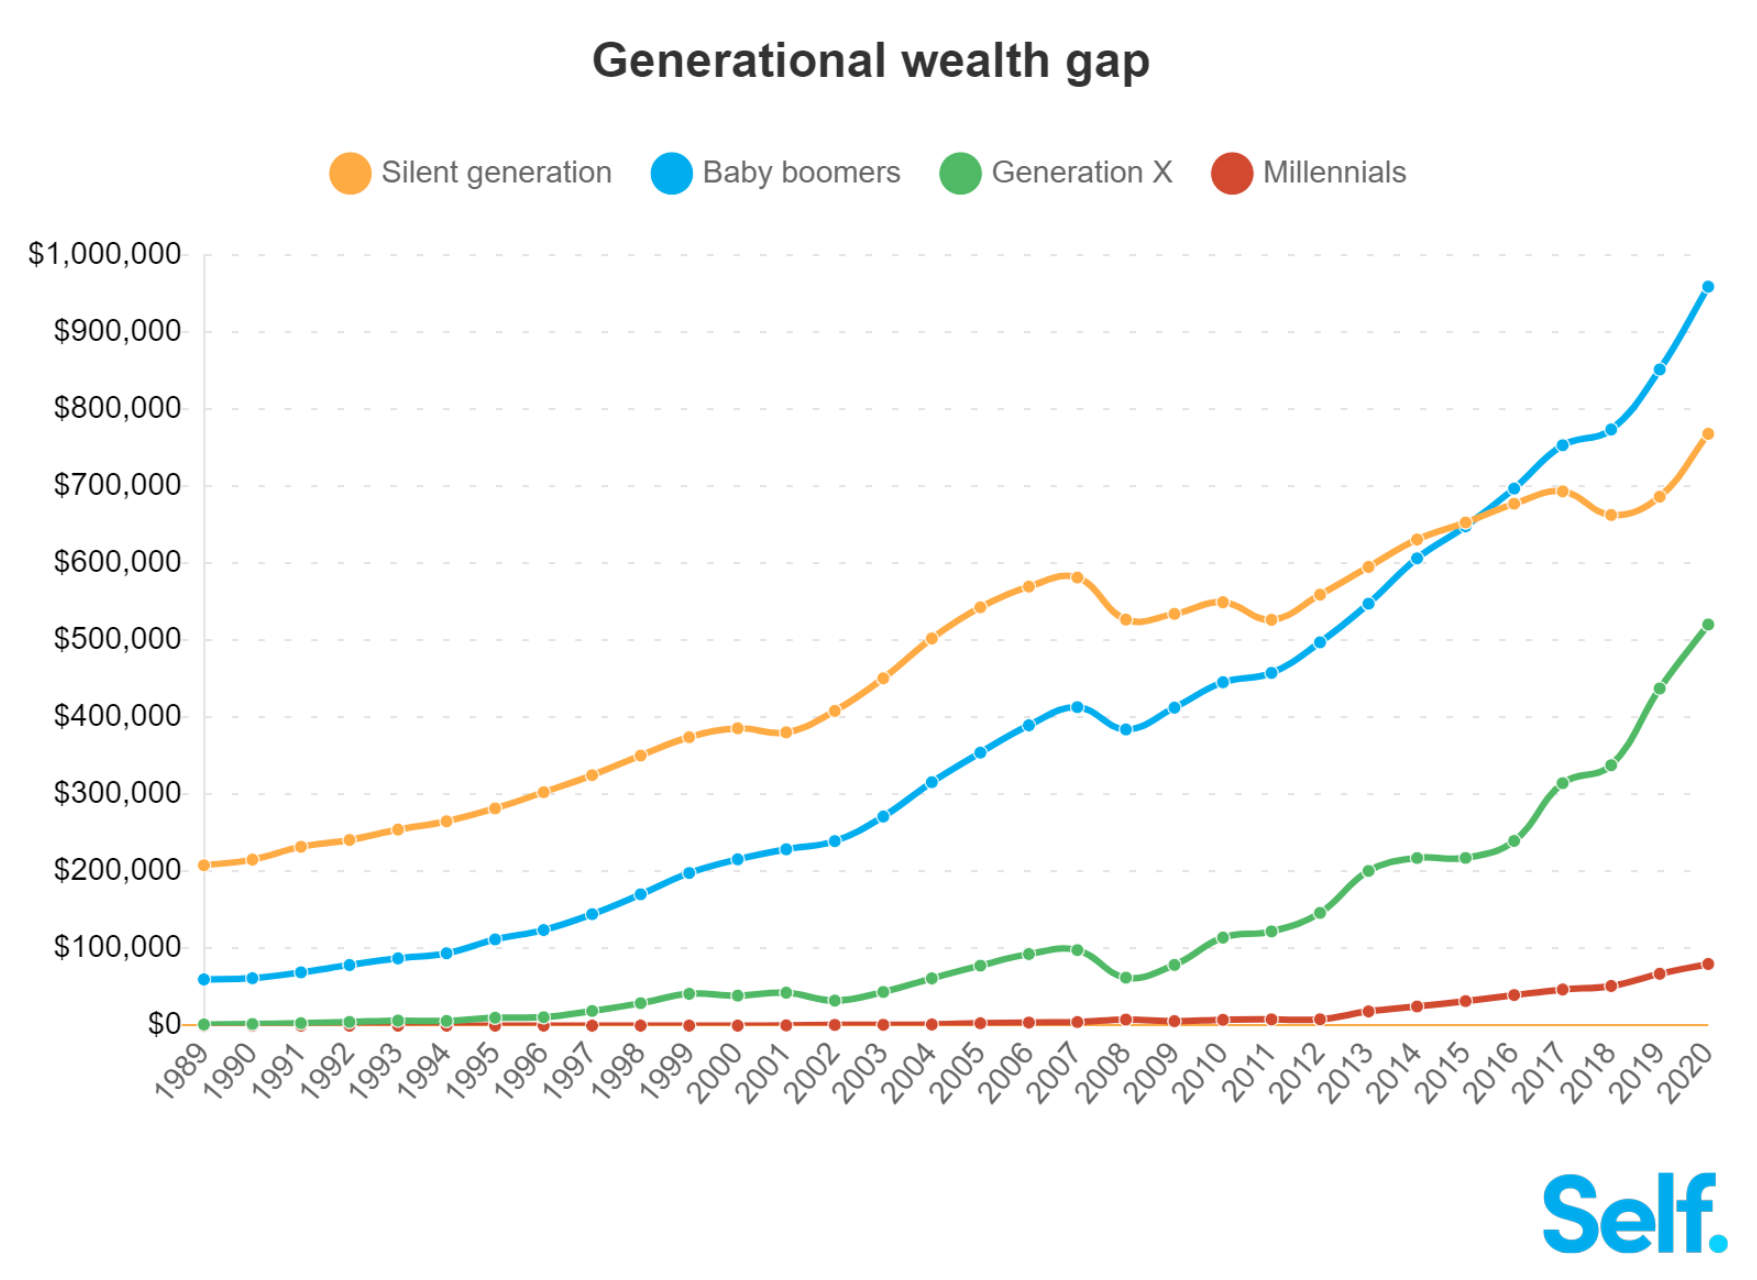 Generational wealth gap in the United States, 1989-2020. In 1998, the American population under 40 years old held 13.1 percent of America’s total wealth. In 2020, those under 40 hold only 6 percent of the total wealth. This means that millennials and Generation X own less than half of the wealth that older generations owned when they were the same age. Graphic: Self Financial, Inc.